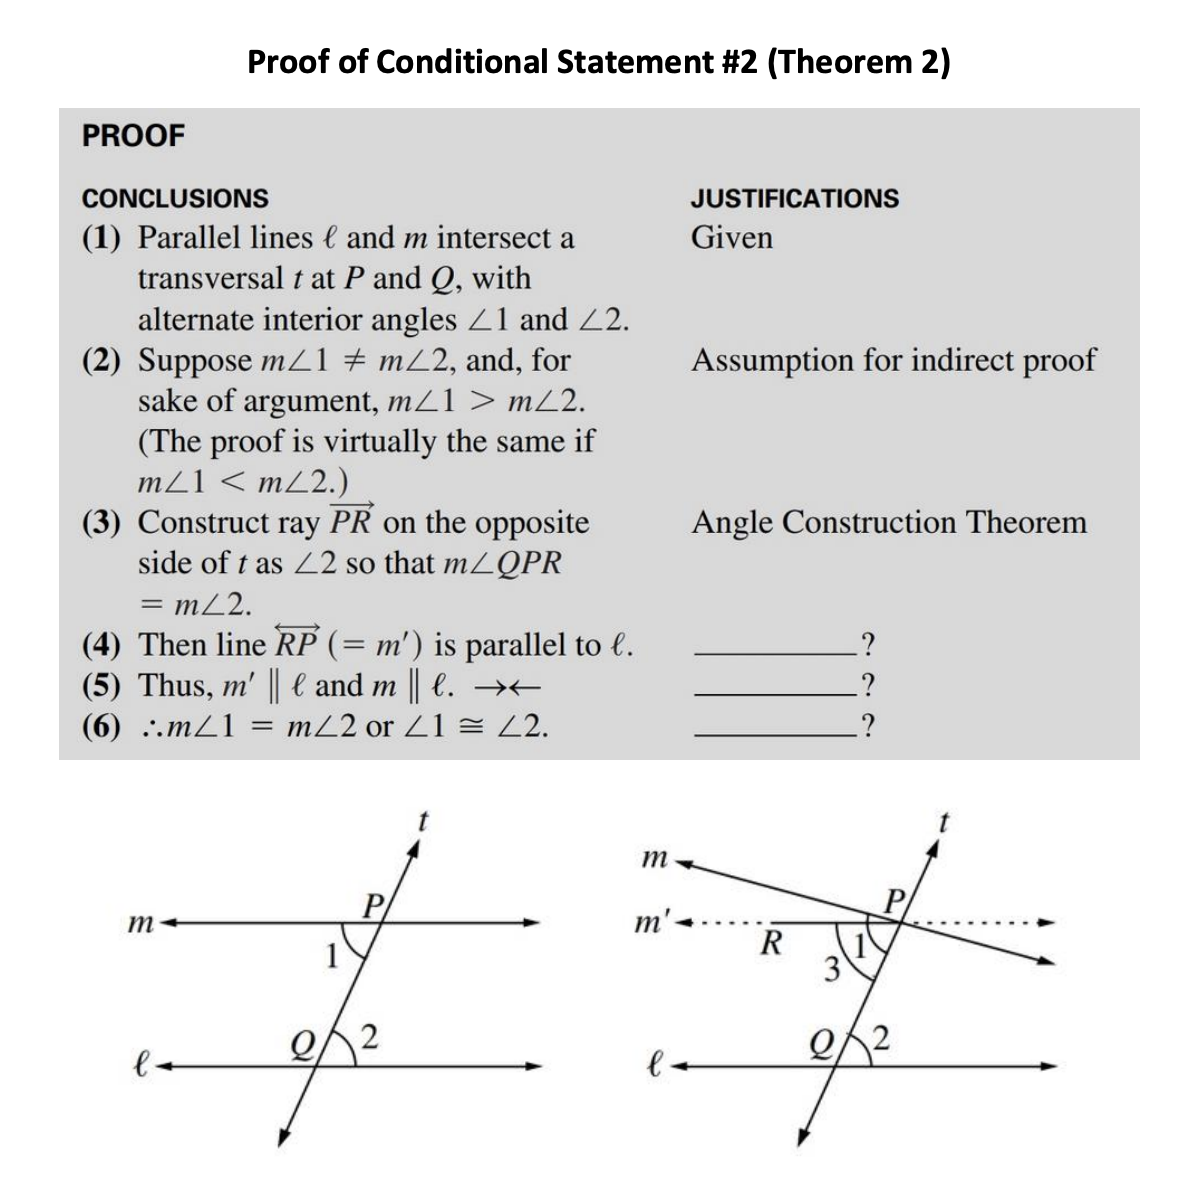 PROOF
Proof of Conditional Statement #2 (Theorem 2)
CONCLUSIONS
(1) Parallel lines and m intersect a
transversal t at P and Q, with
alternate interior angles 21 and 22.
(2) Suppose m/21 # m/2, and, for
sake of argument, m/1 > m/2.
(The proof is virtually the same if
m21 < m22.)
(3) Construct ray PR on the opposite
side of t as 22 so that m/QPR
= m/2.
(4) Then line RP (= m') is parallel to l.
(5) Thus, m' || € and m || l. →←
(6) ..m/1
= m/2 or 1 = 42.
m
1
2
m
m'.
e
JUSTIFICATIONS
Given
Assumption for indirect proof
Angle Construction Theorem
R
?
.?
2/2